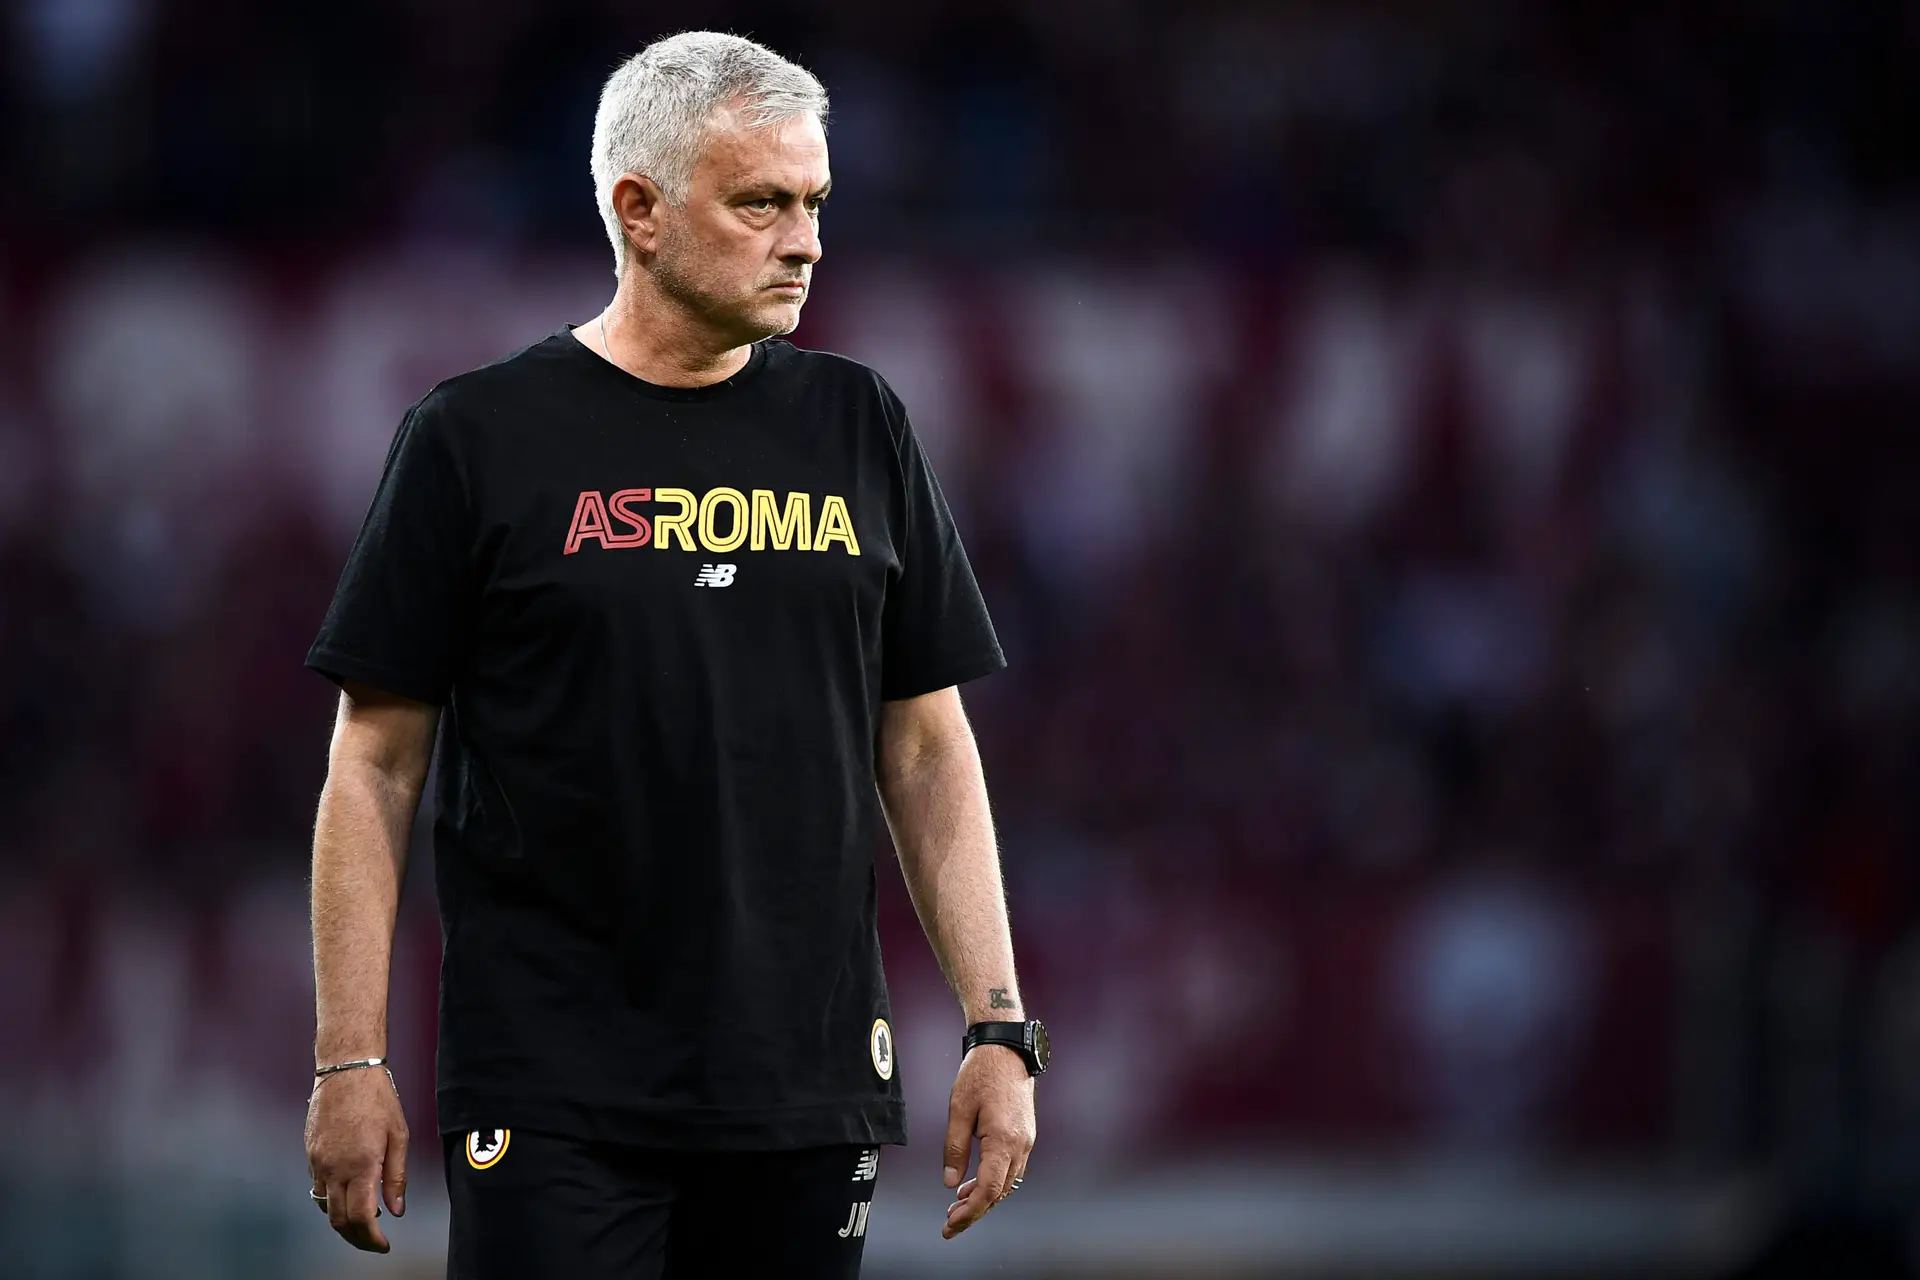 STADIO OLIMPICO GRANDE TORINO, TURIN, ITALY – 2022/05/20: Jose Mourinho, head coach of AS Roma, looks on during the Serie A football match between Torino FC and AS Roma. AS Roma won 3-0 over Torino FC. (Photo by Nicolò Campo/LightRocket via Getty Images)